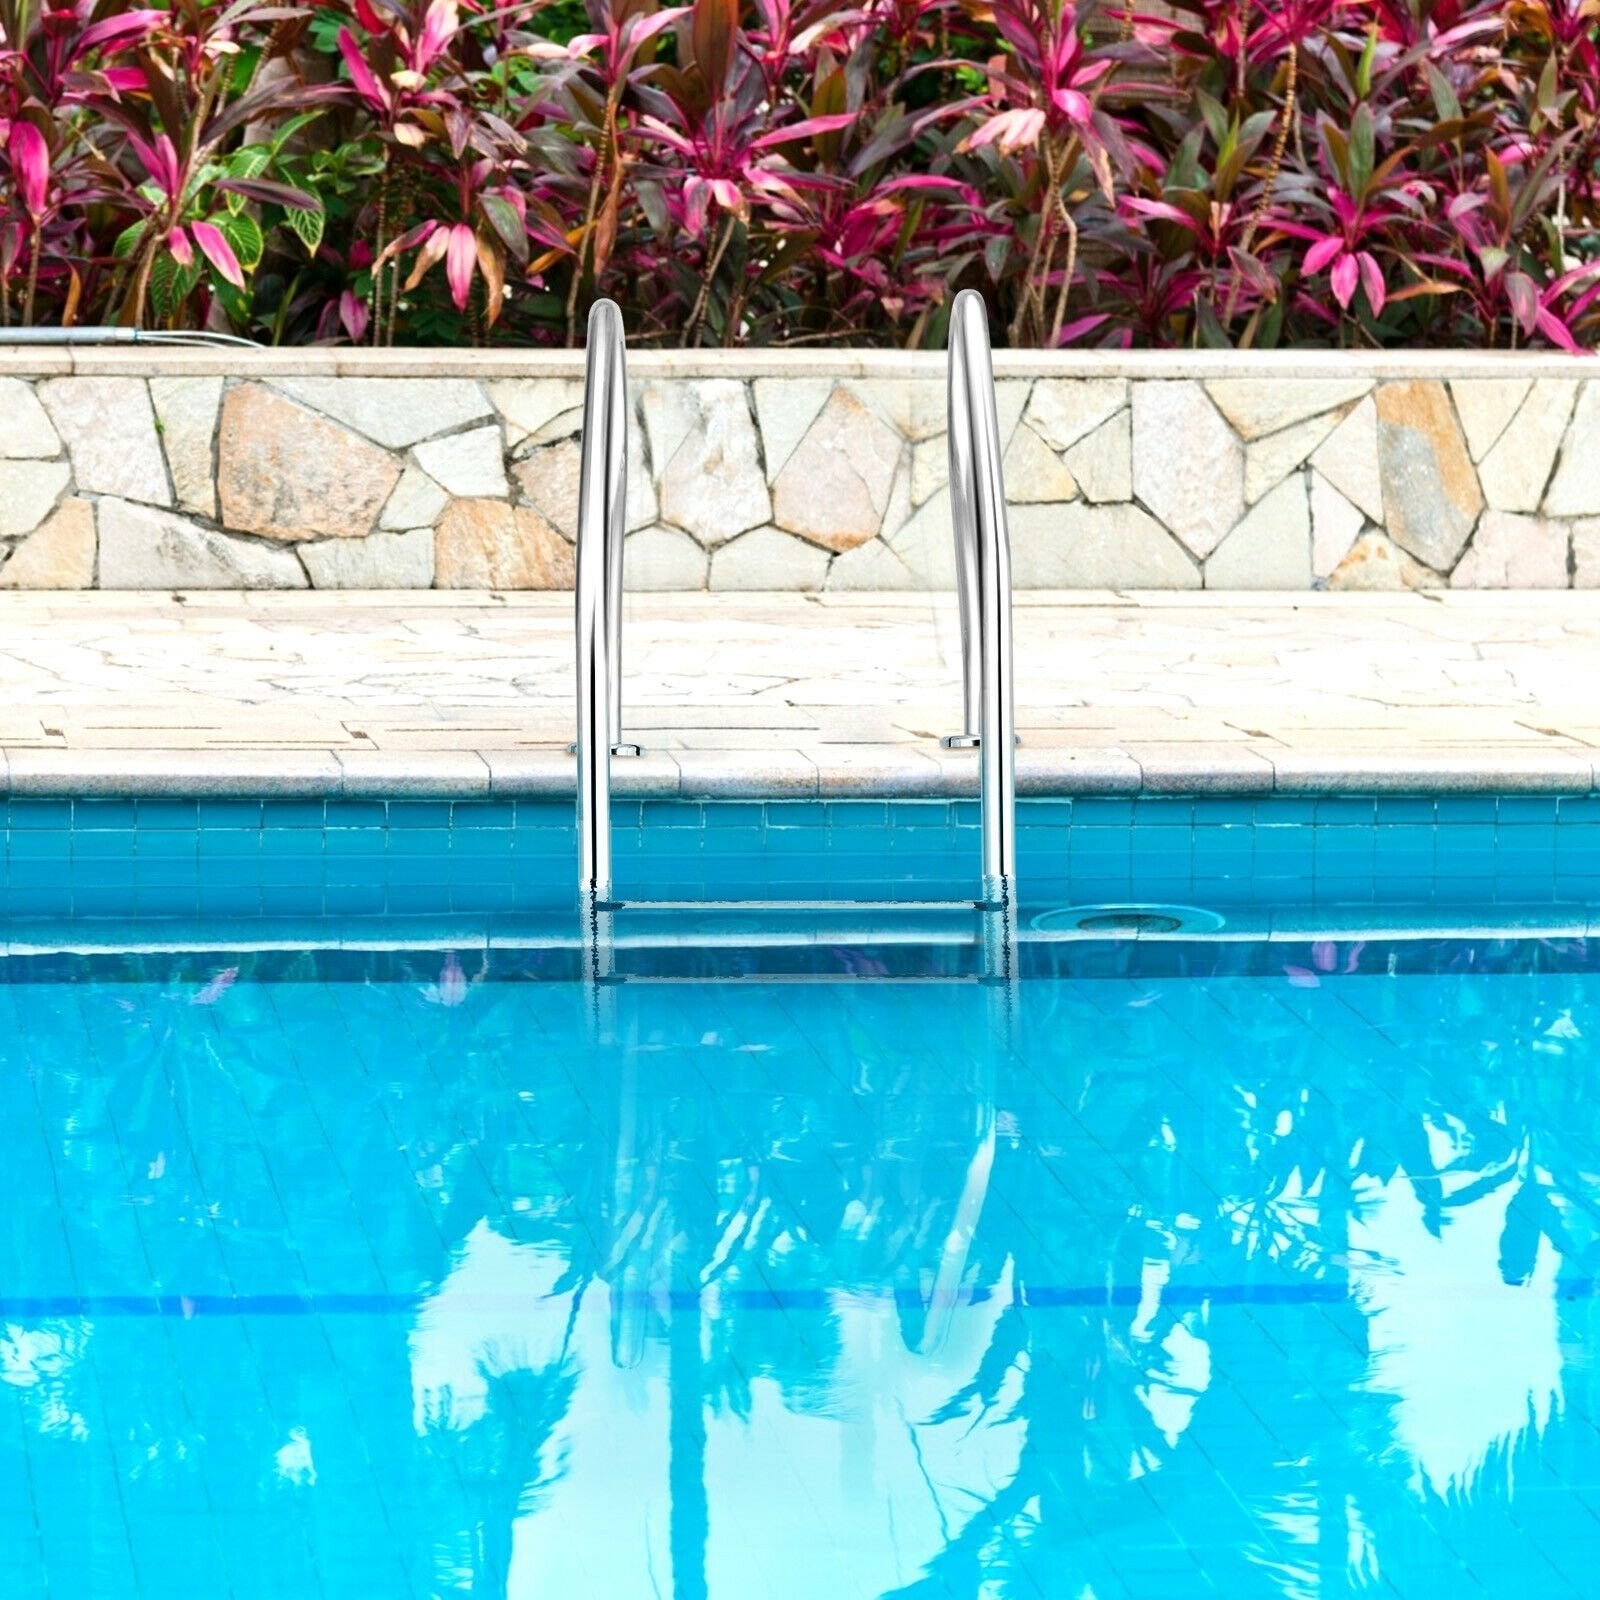 3-Step Stainless Steel Non-Slip Swimming Pool Ladder, Silver at Gallery Canada